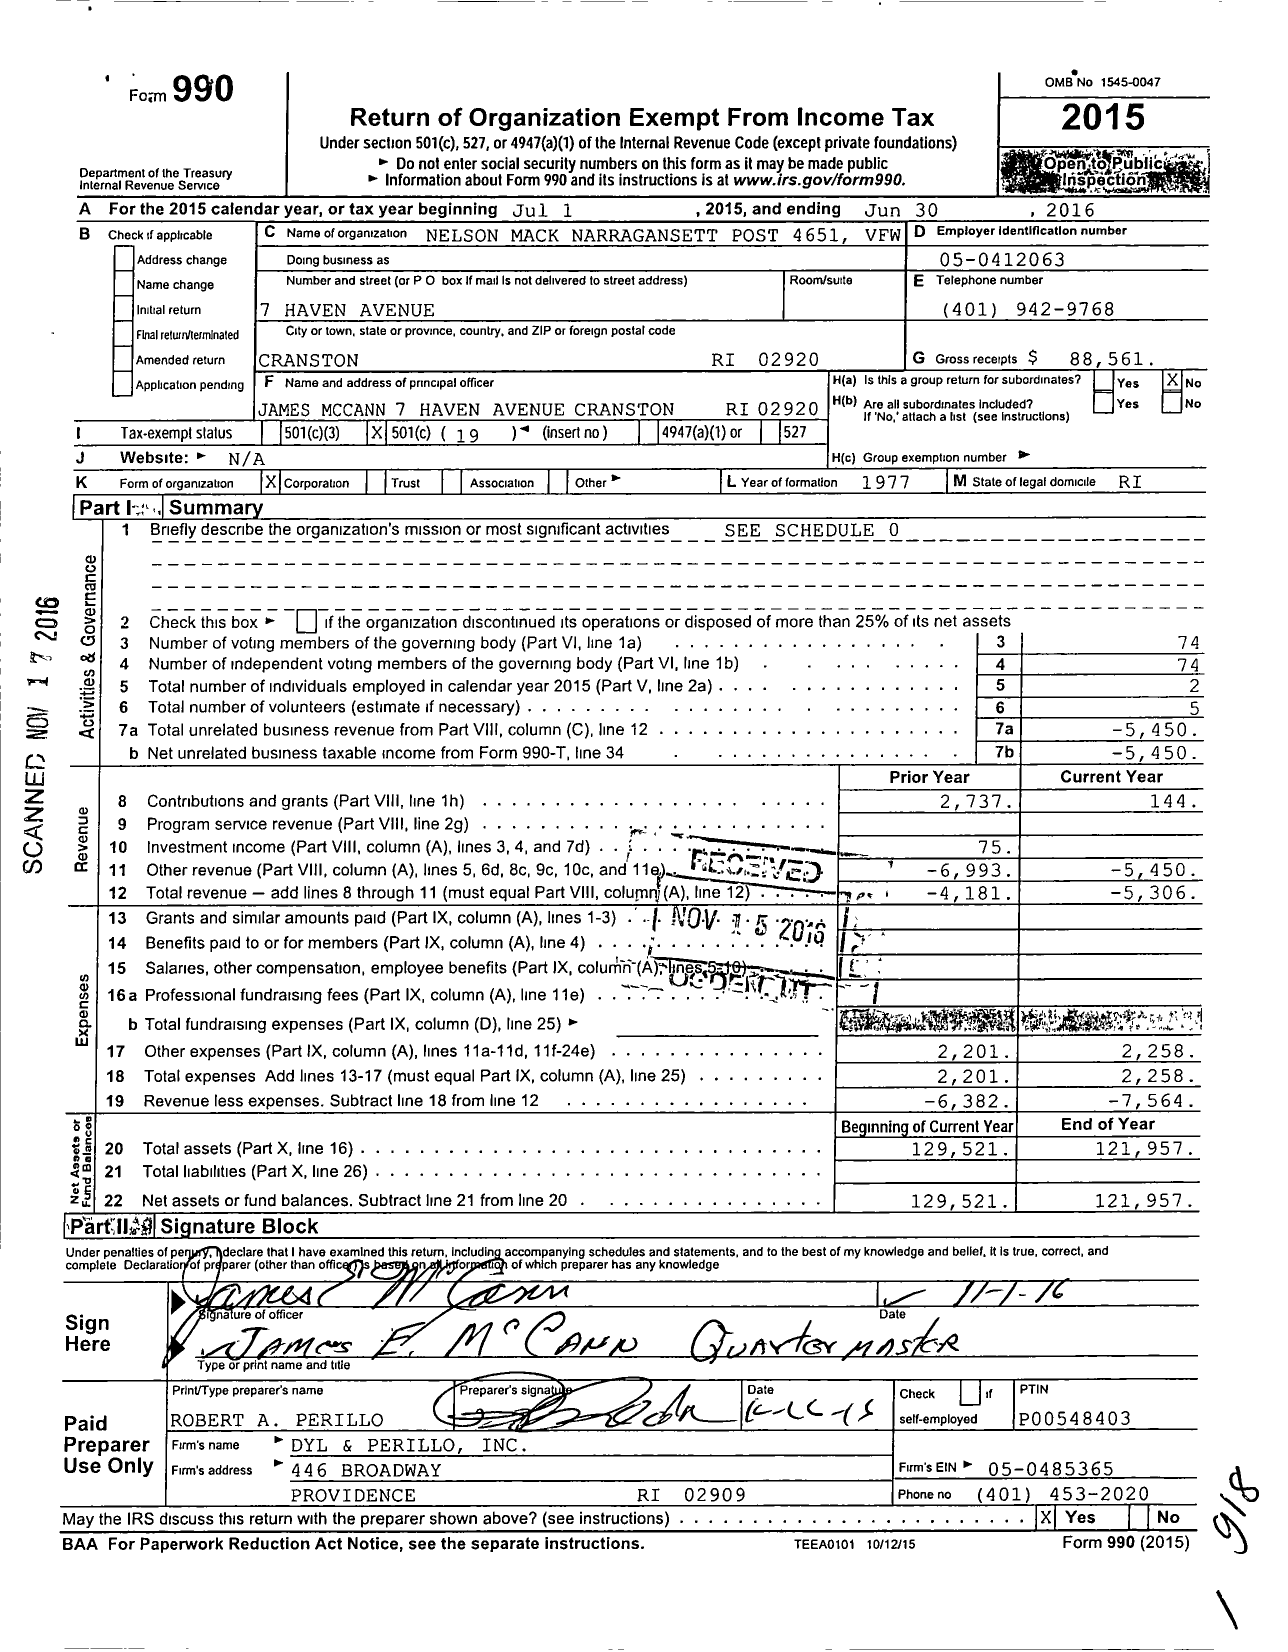 Image of first page of 2015 Form 990O for Veterans of Foreign Wars Dept of Rhode Island - 4651 Mack Narragansett Post